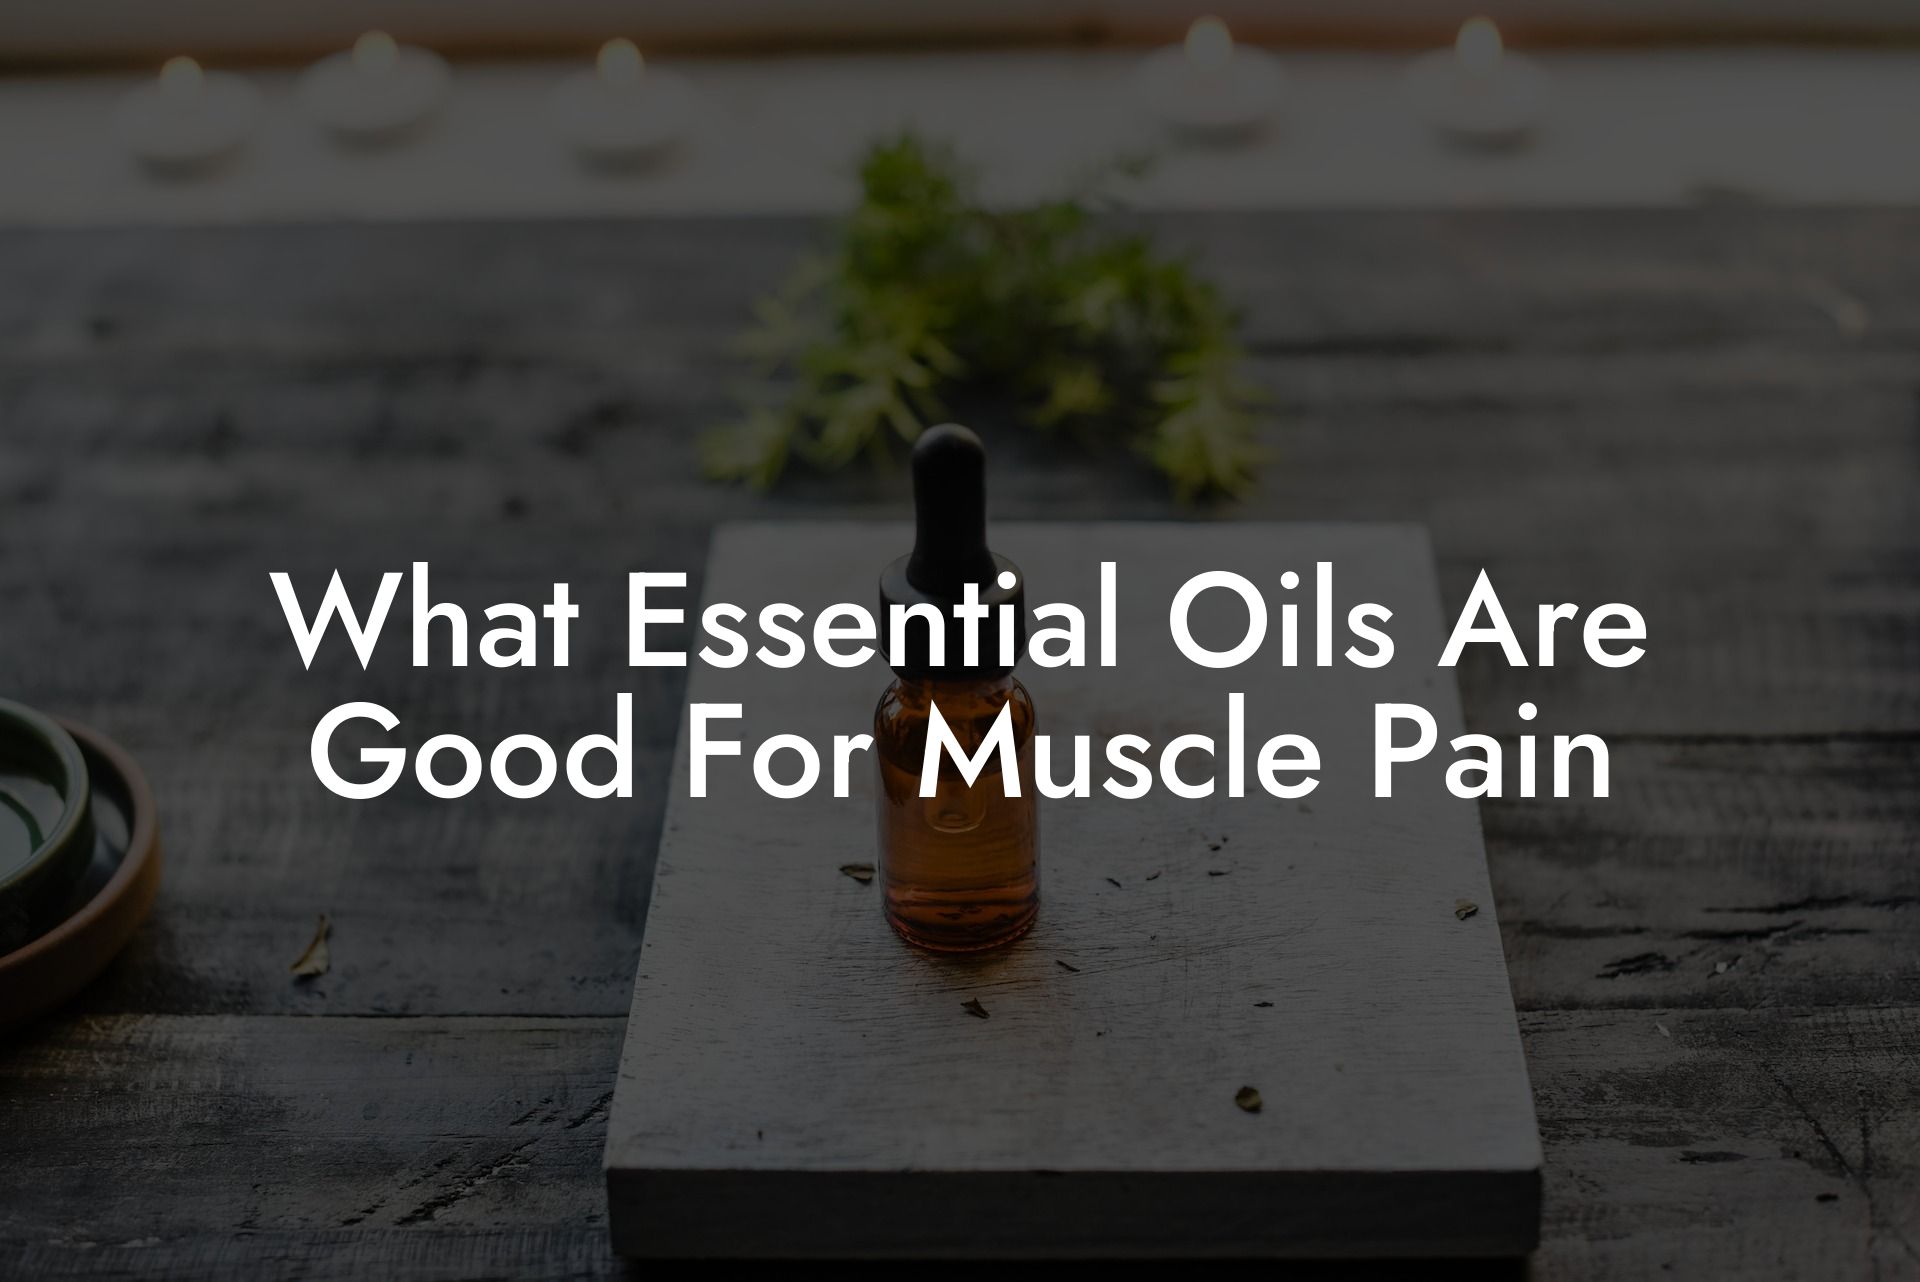 What Essential Oils Are Good For Muscle Pain